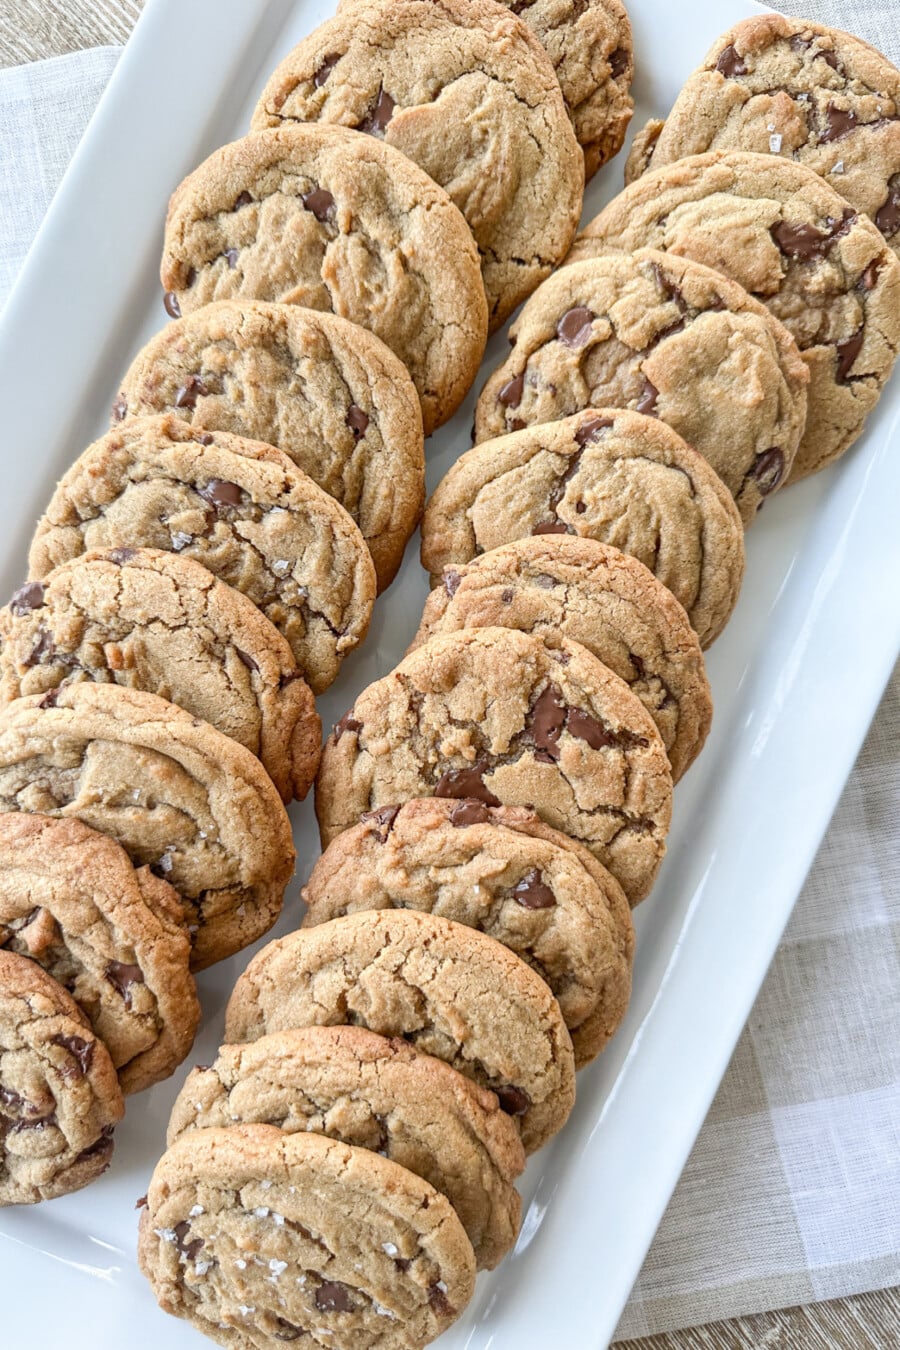 Barely Baked Chocolate Chip Cookies With Sea Salt